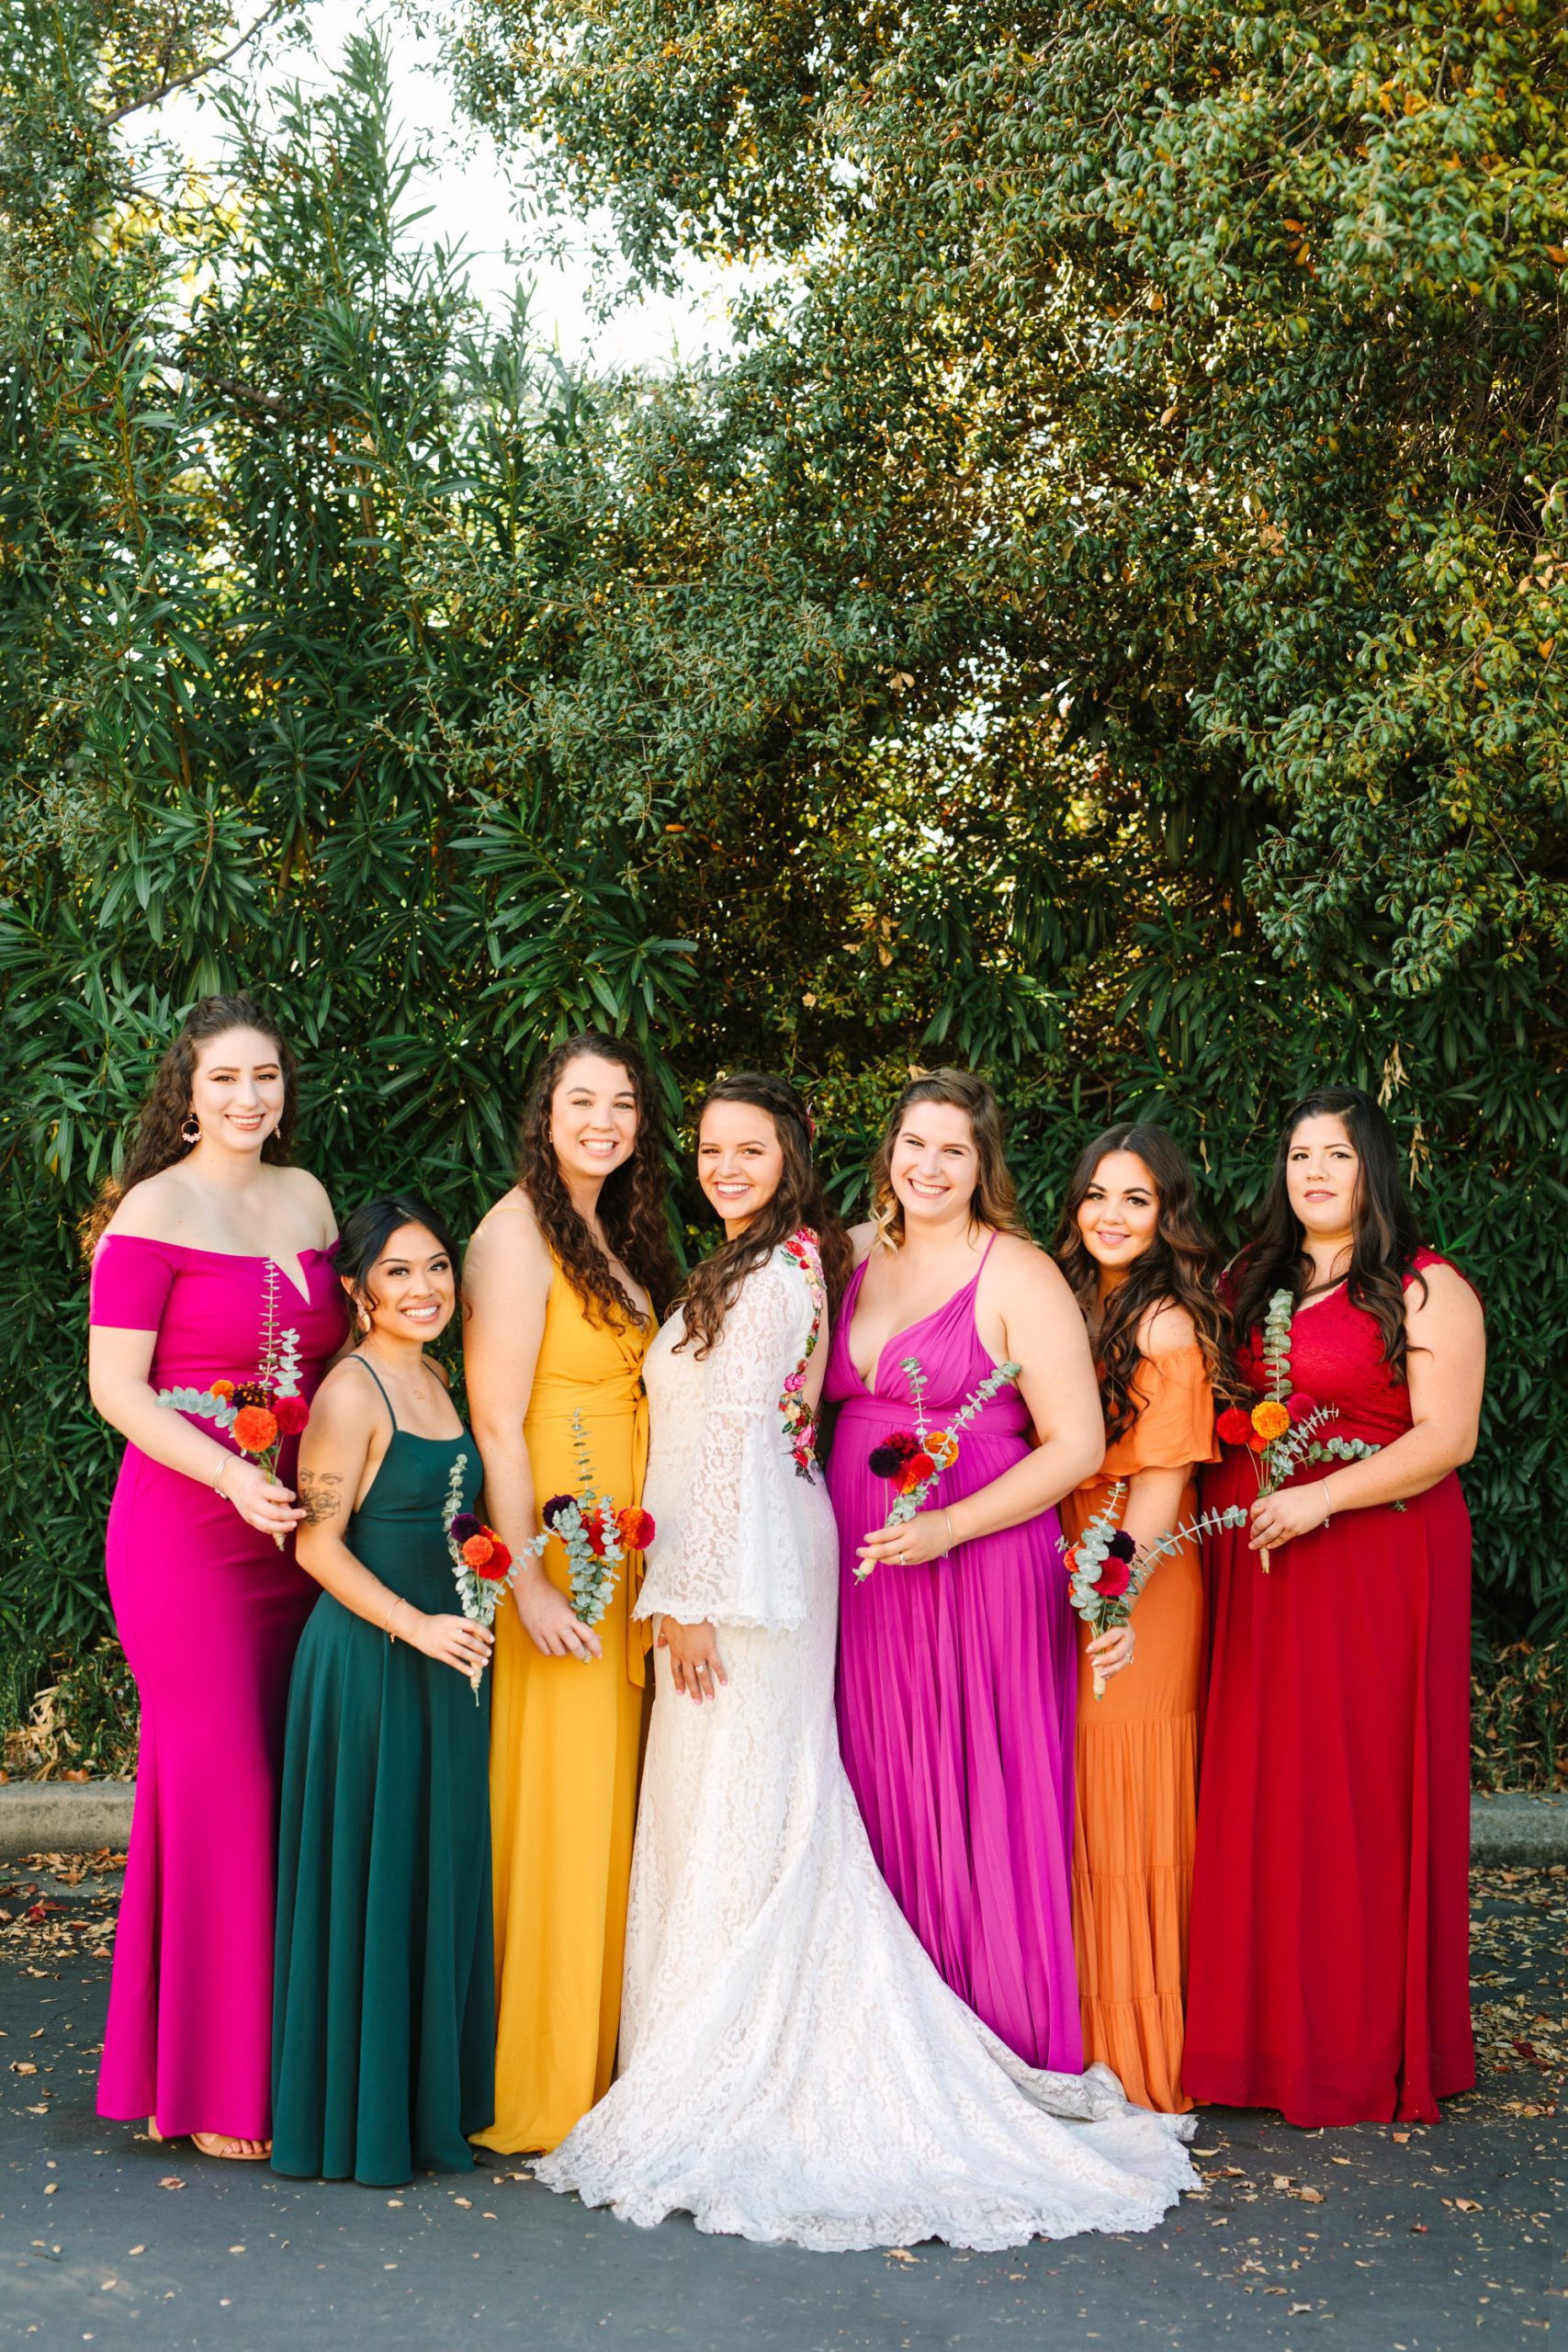 Bride and bridesmaids in colorful assorted dresses - www.marycostaweddings.com